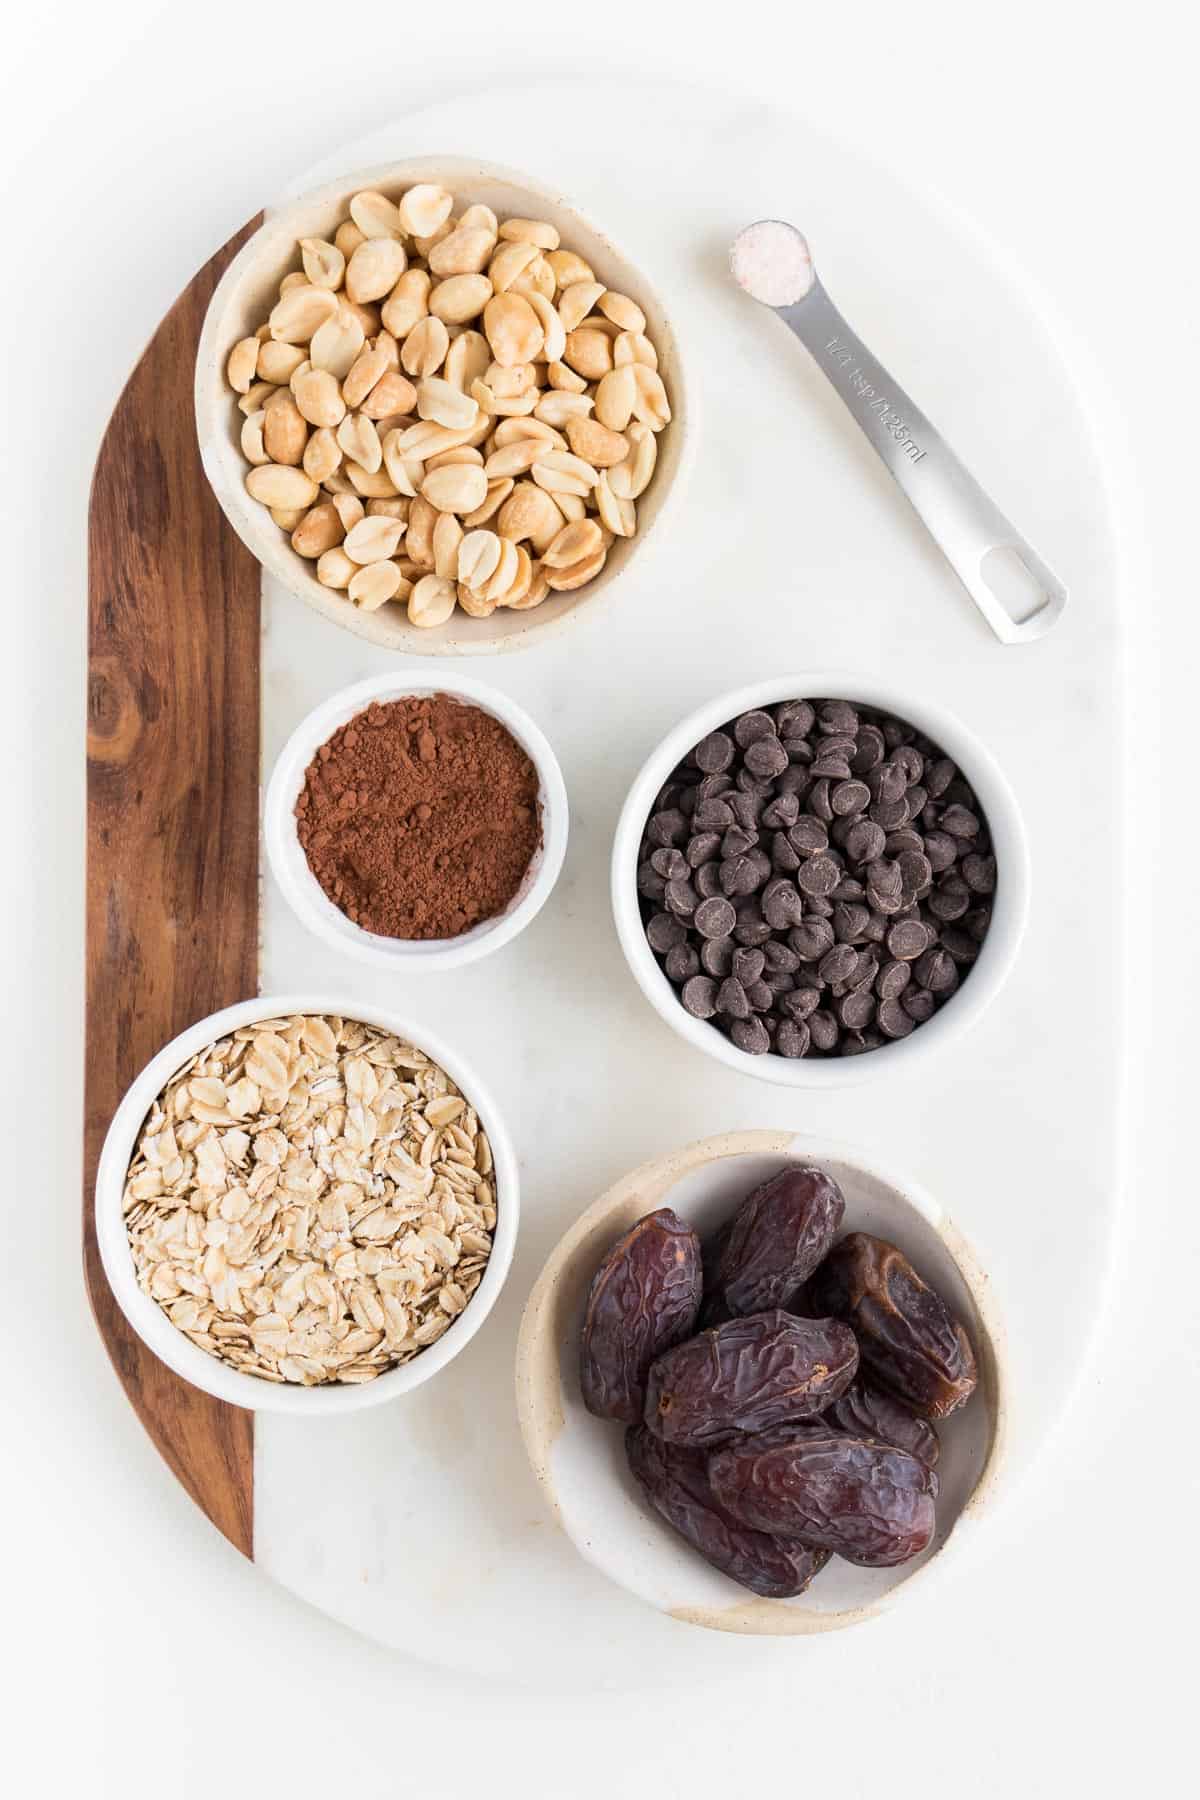 a marble and wood cutting board topped with small bowls containing chopped peanuts, cocoa powder, chocolate chips, oats, medjool dates, and a metal teaspoon